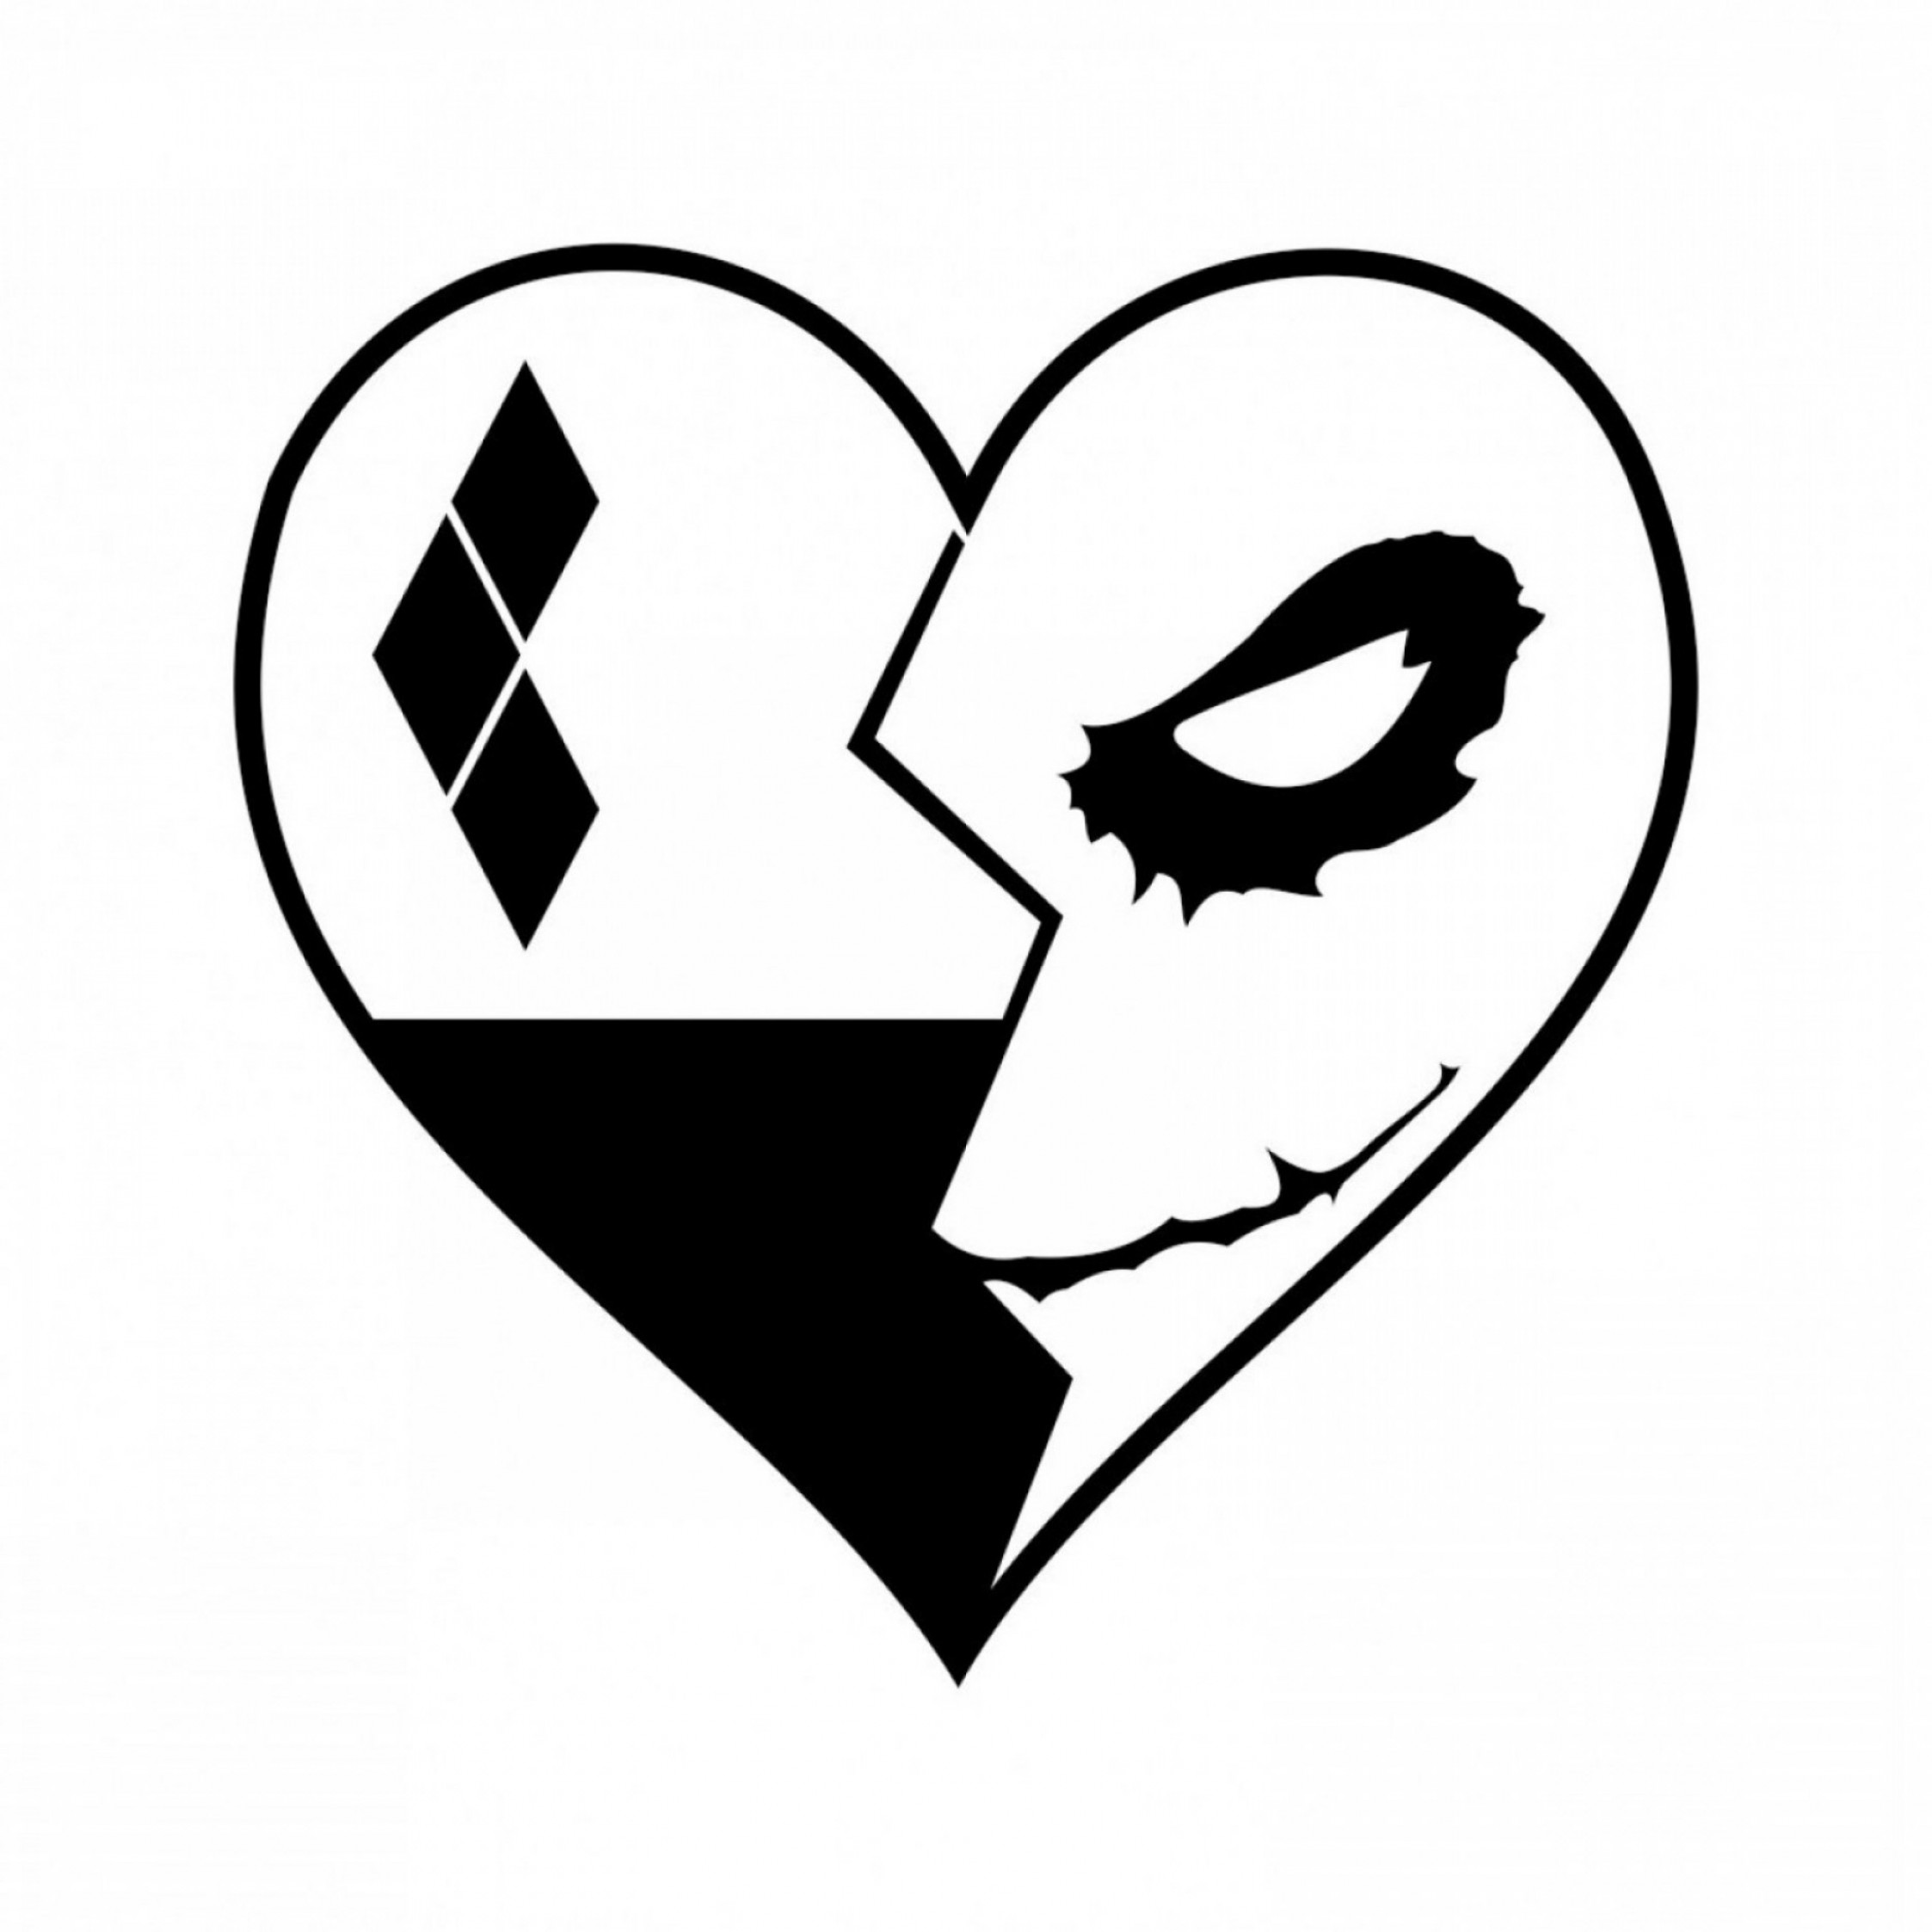 Joker And Harley Quinn Heart Graphics Design Svg Dxf Eps Png Cdr Ai.